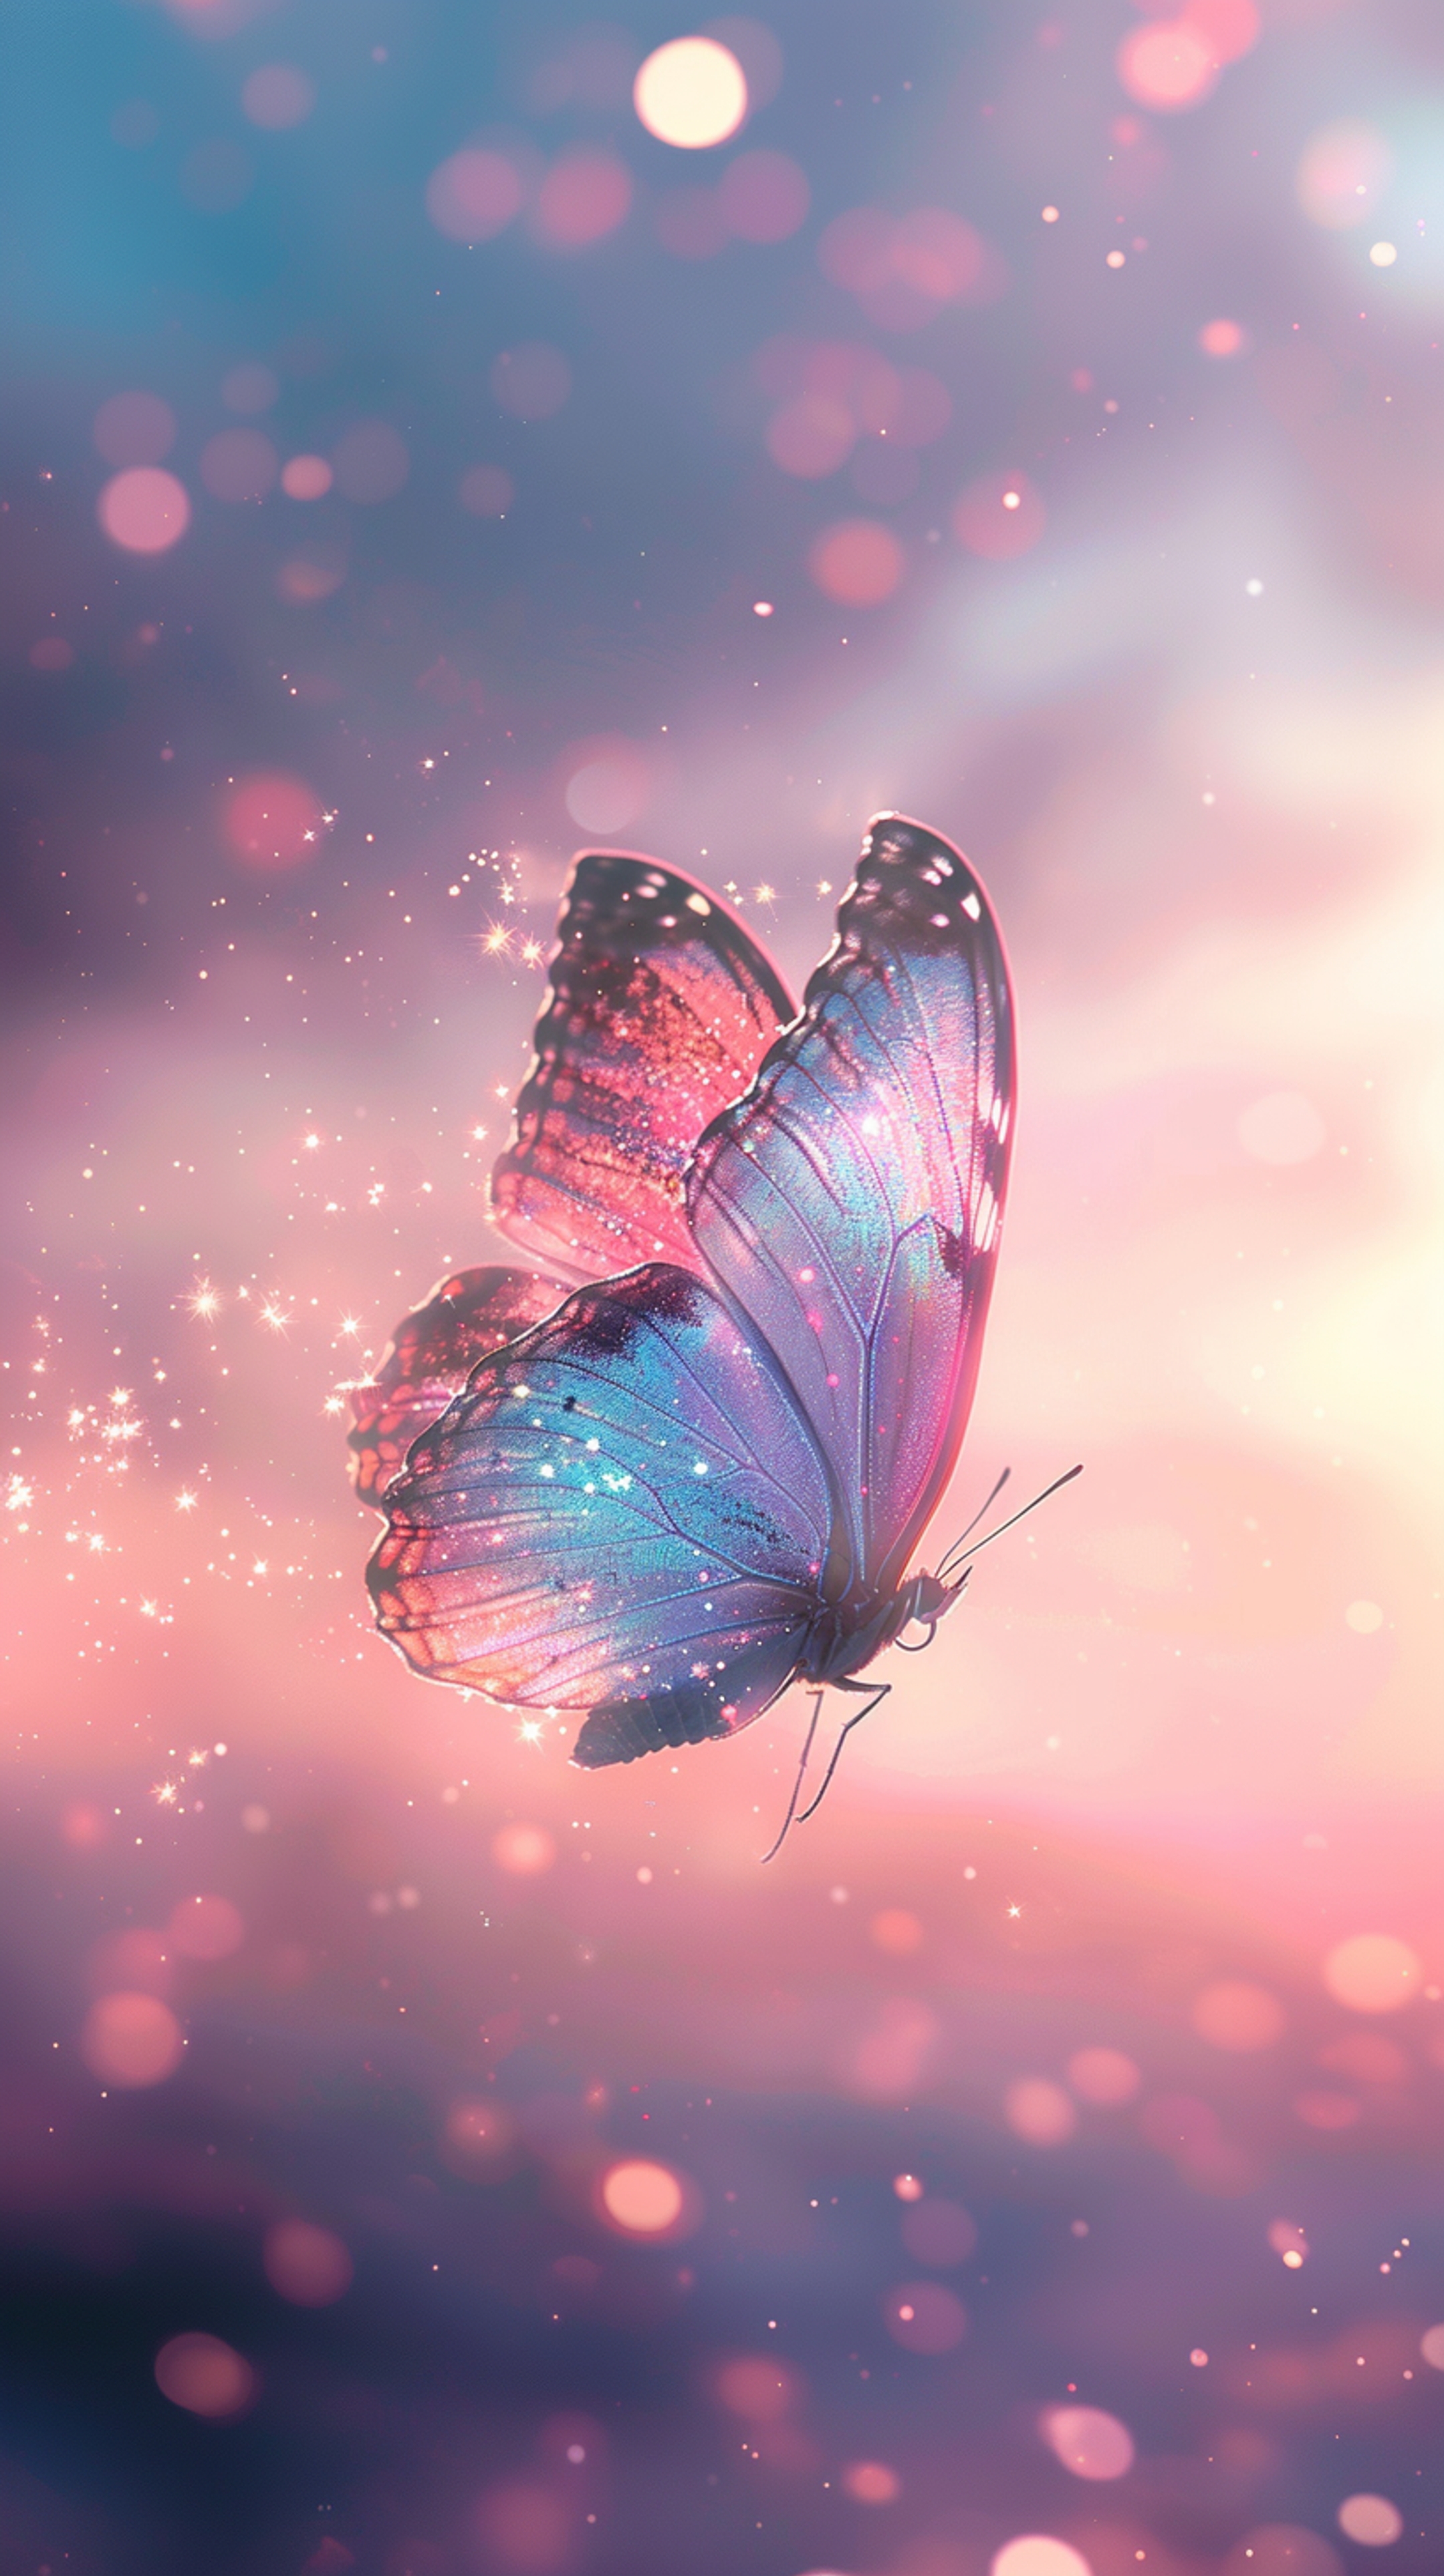 Magical Sparkling Butterfly in Dreamy Pink Sky Sfondo[1278b2409cd84640a5d9]